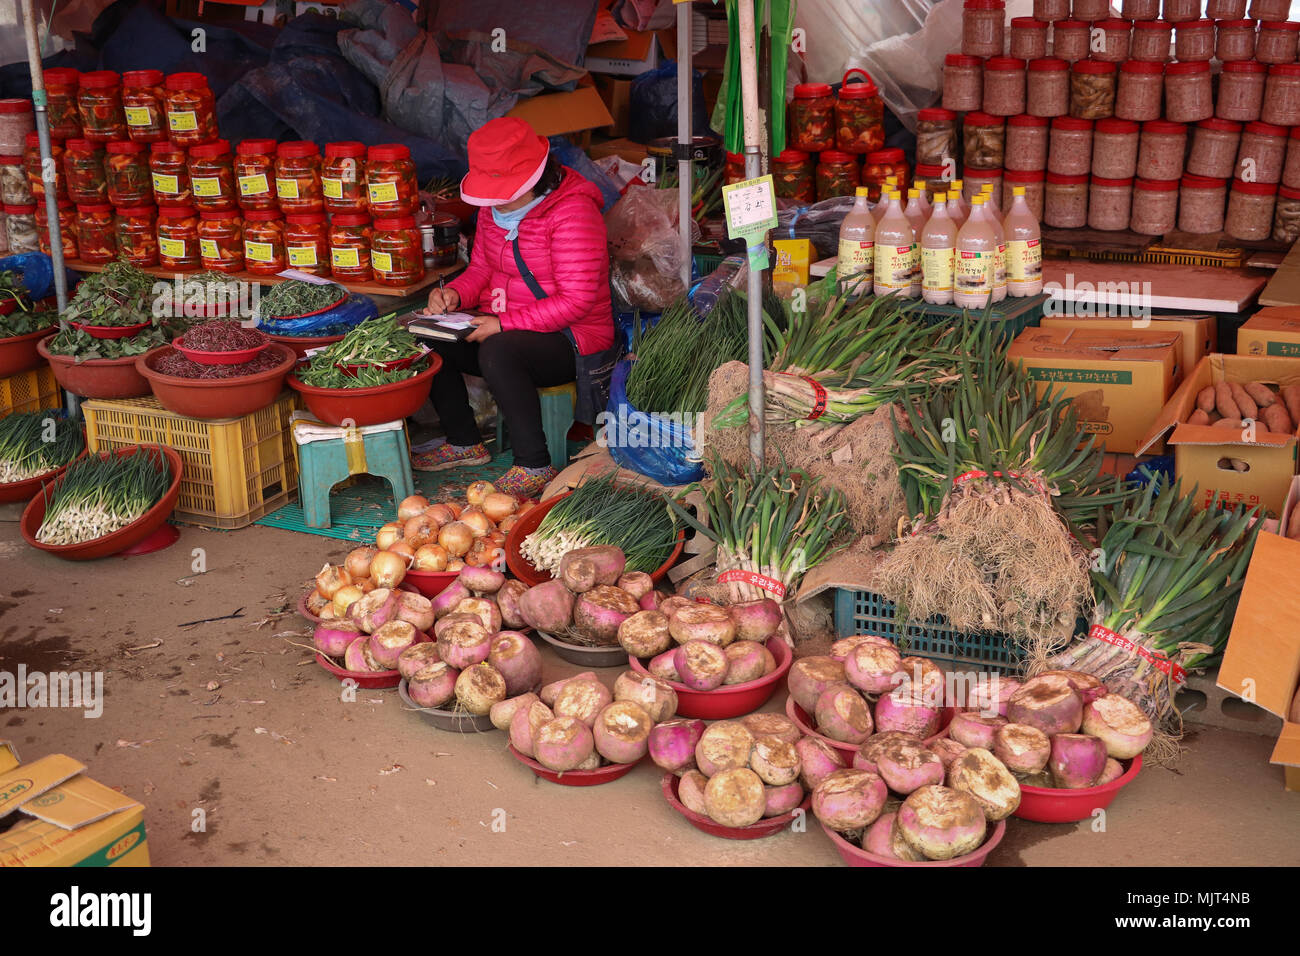 A Korean woman in a bright pink jacket oversees her stall in the Traditional Market in Ganghwa, South Korea, where she sells Kimchi, turnips, onions. Stock Photo